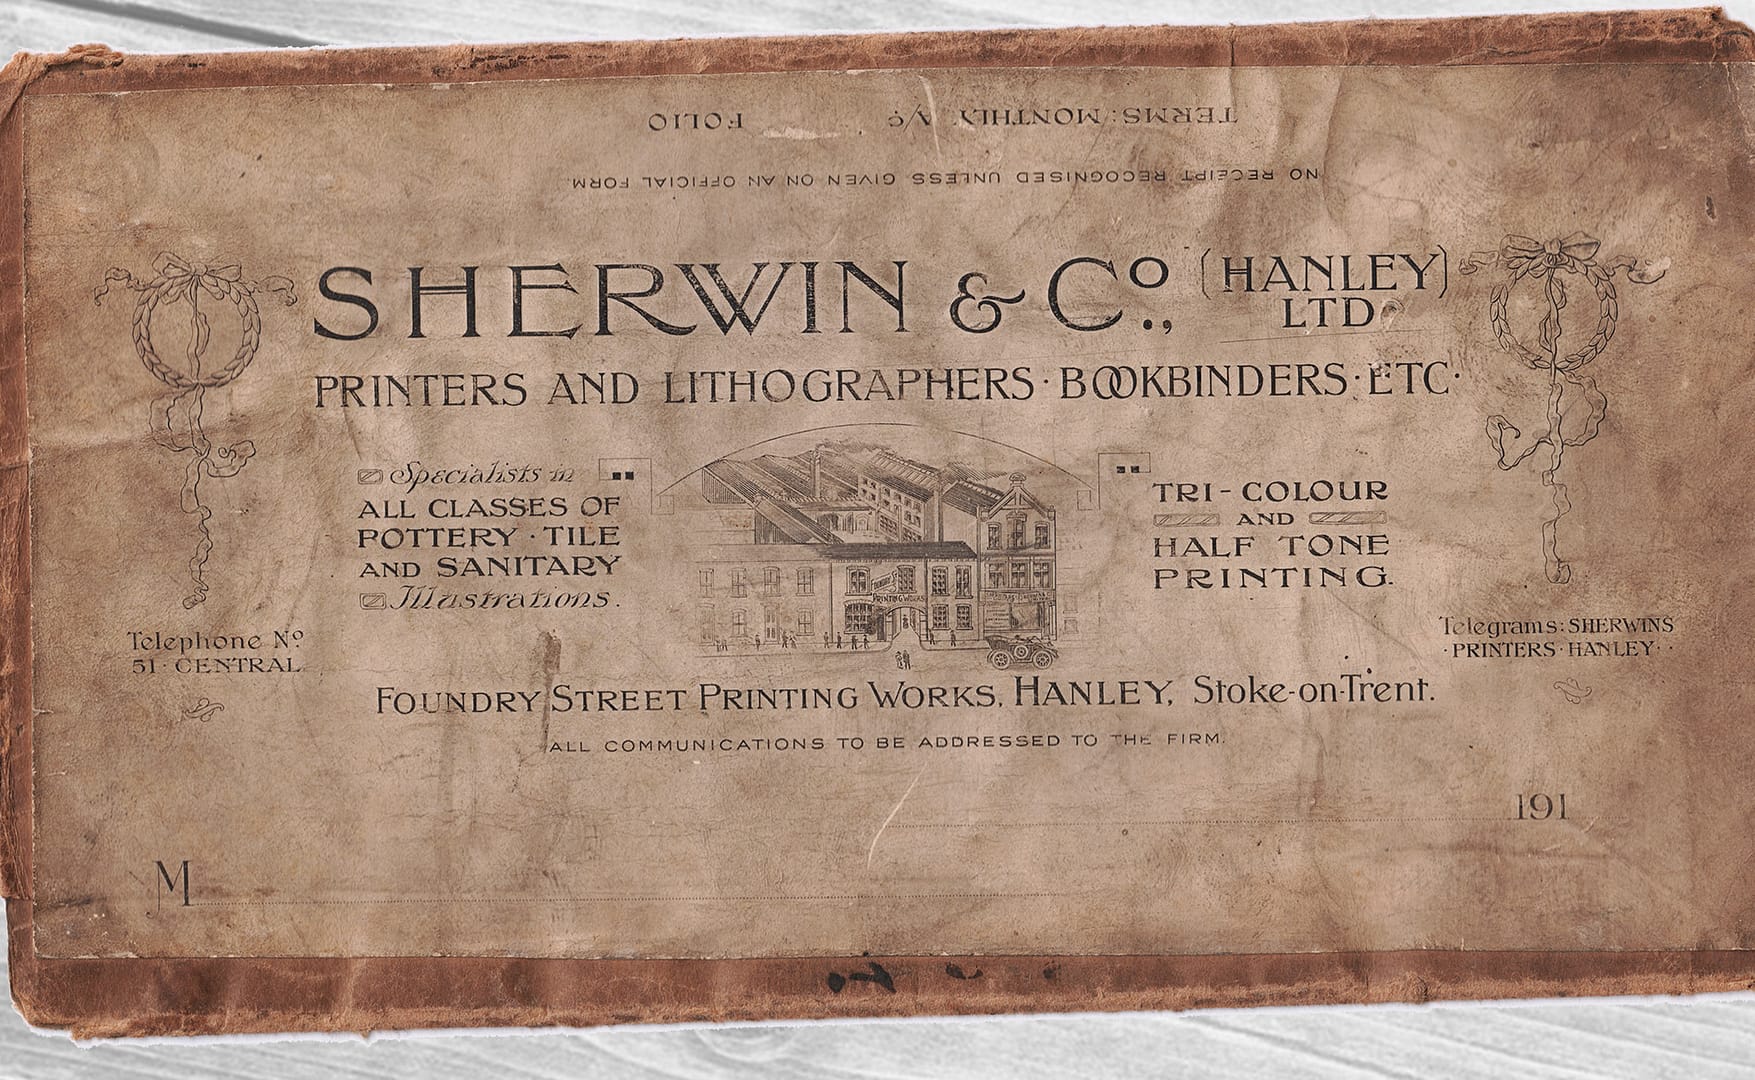 Sherwin Rivers Printers Ltd - Stoke-on-Trent, Staffordshire, Family run printing company for over a century - Sherwin & Co Packaging from the turn of the 19th century